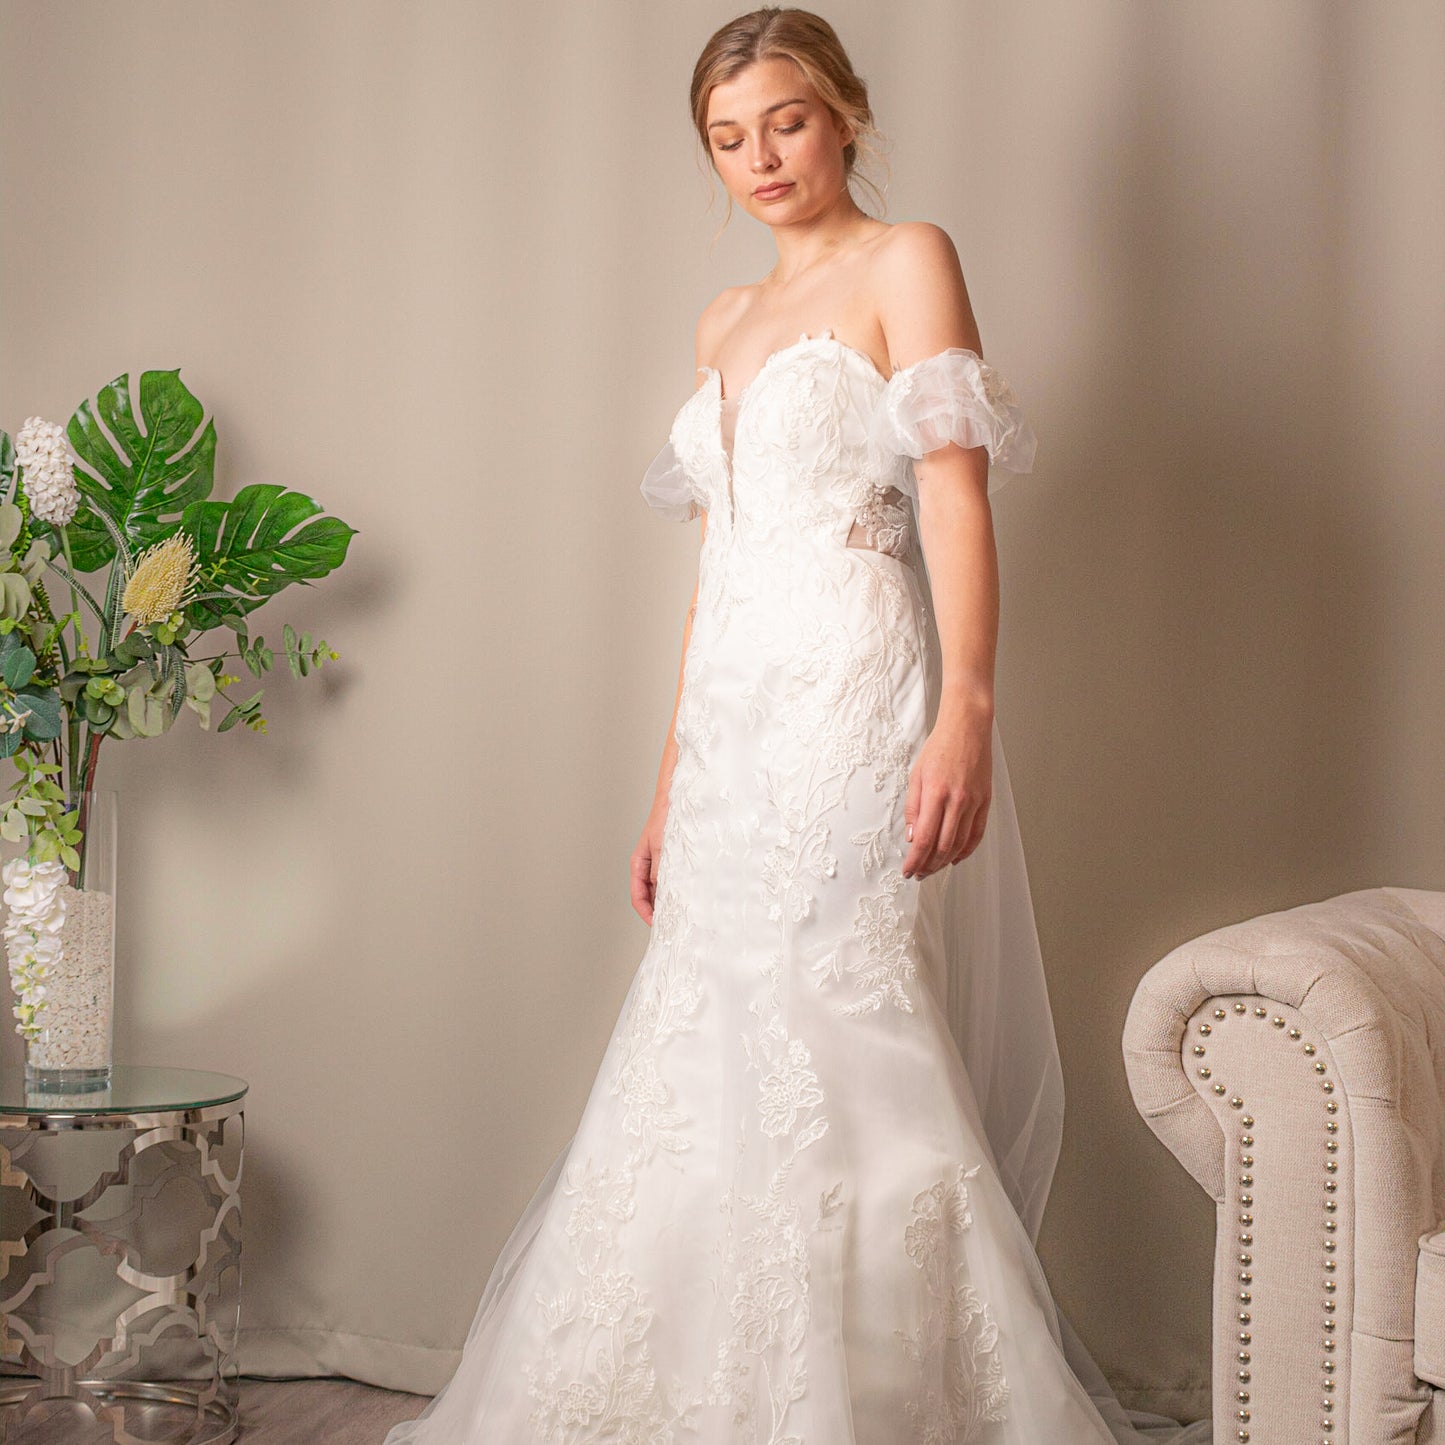 Catherine lace mermaid bridal gown with optional detachable tulle skirt from Divine Bridal.